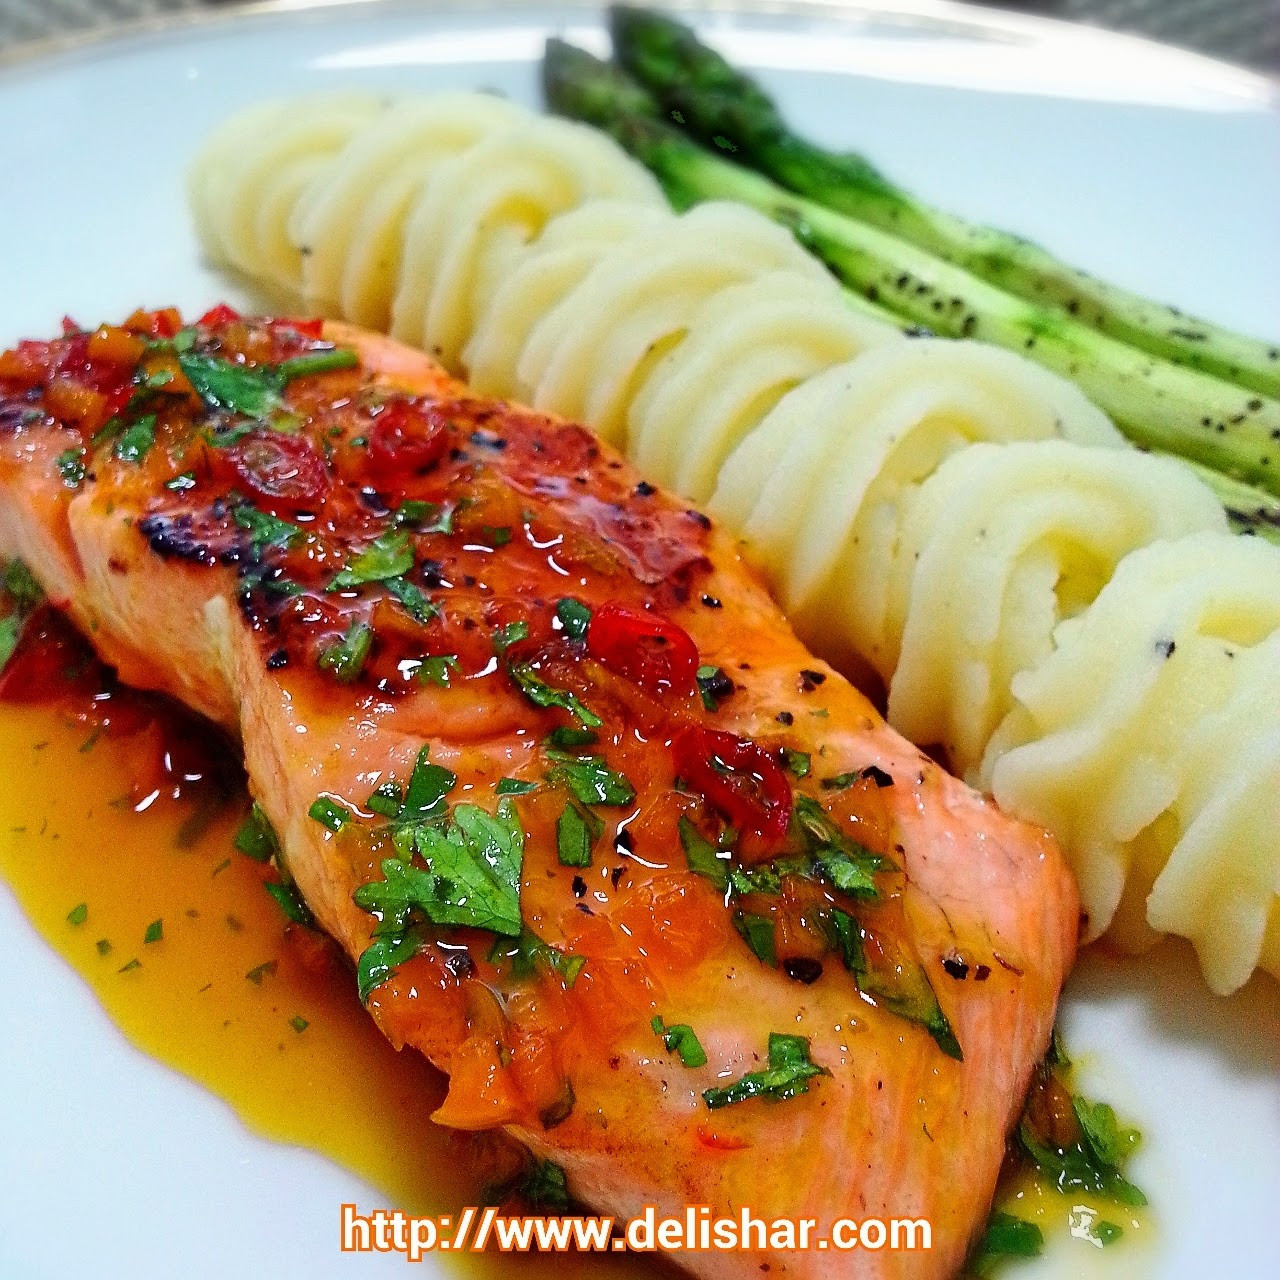 Salmon And Mashed Potatoes
 DELISHAR Singapore Cooking & Food Blog Salmon with Spicy